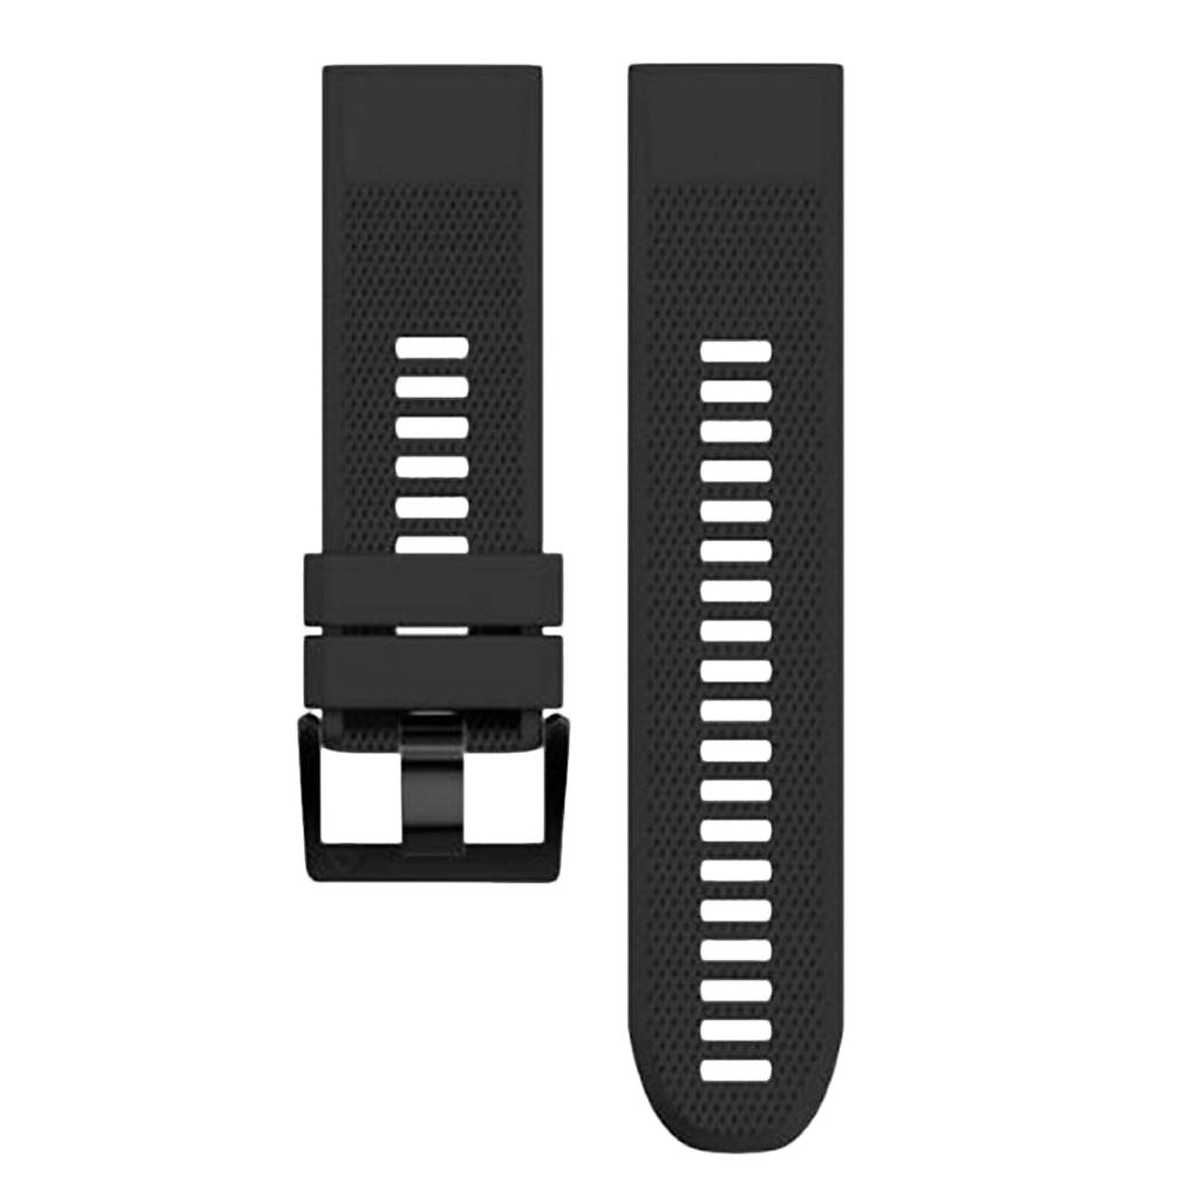 Garmin Watch Band Replacement Parts | Reviewmotors.co